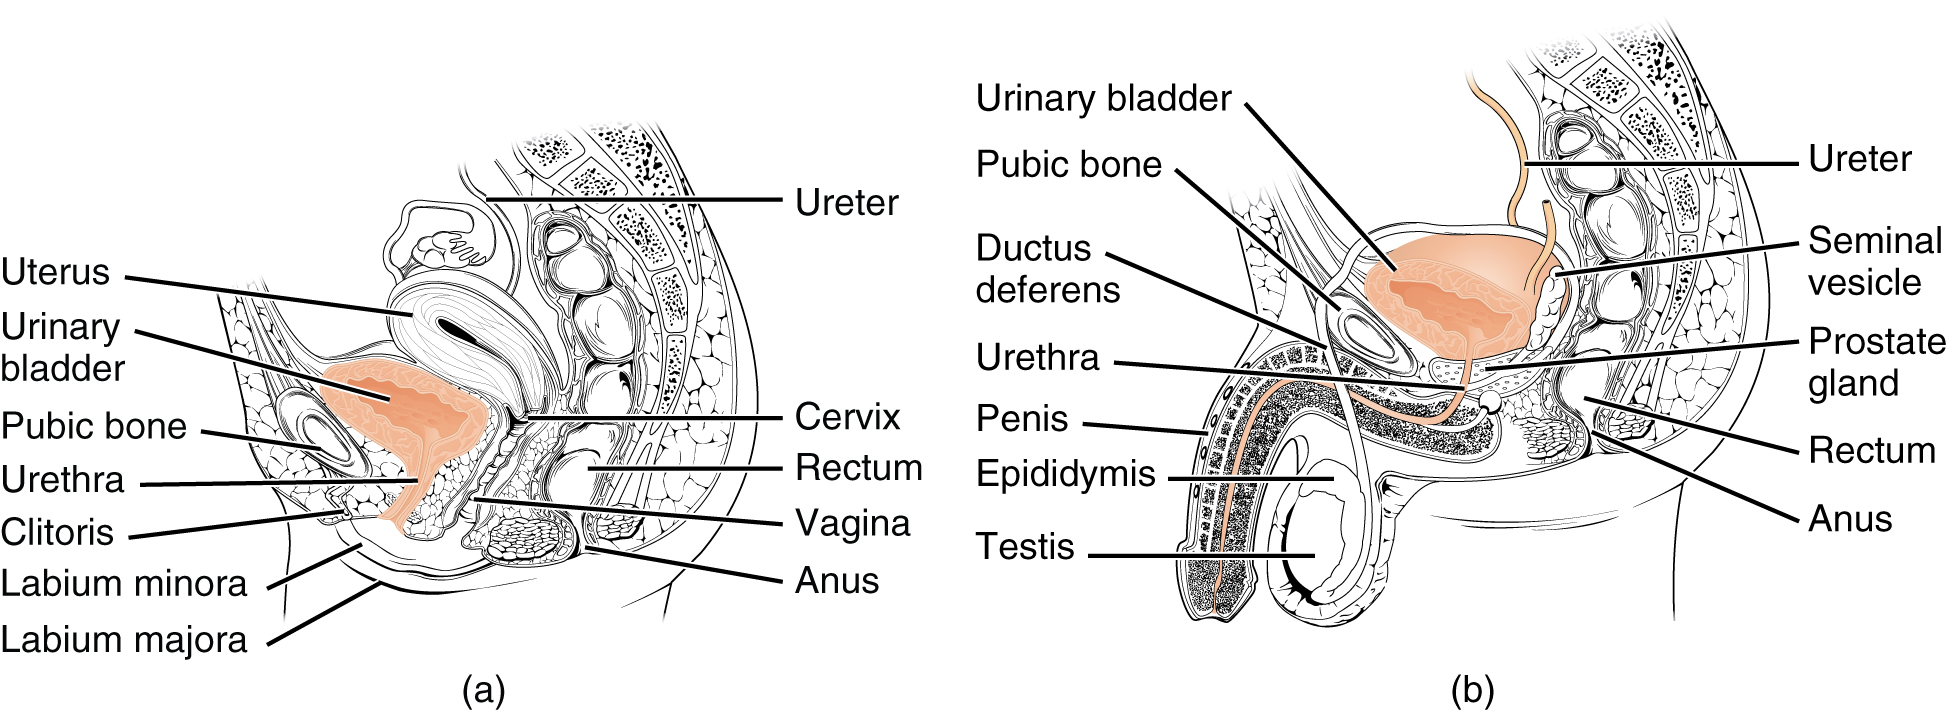 Diagrams of the (a) female and (b) male genitalia highlighting the respective urethras.